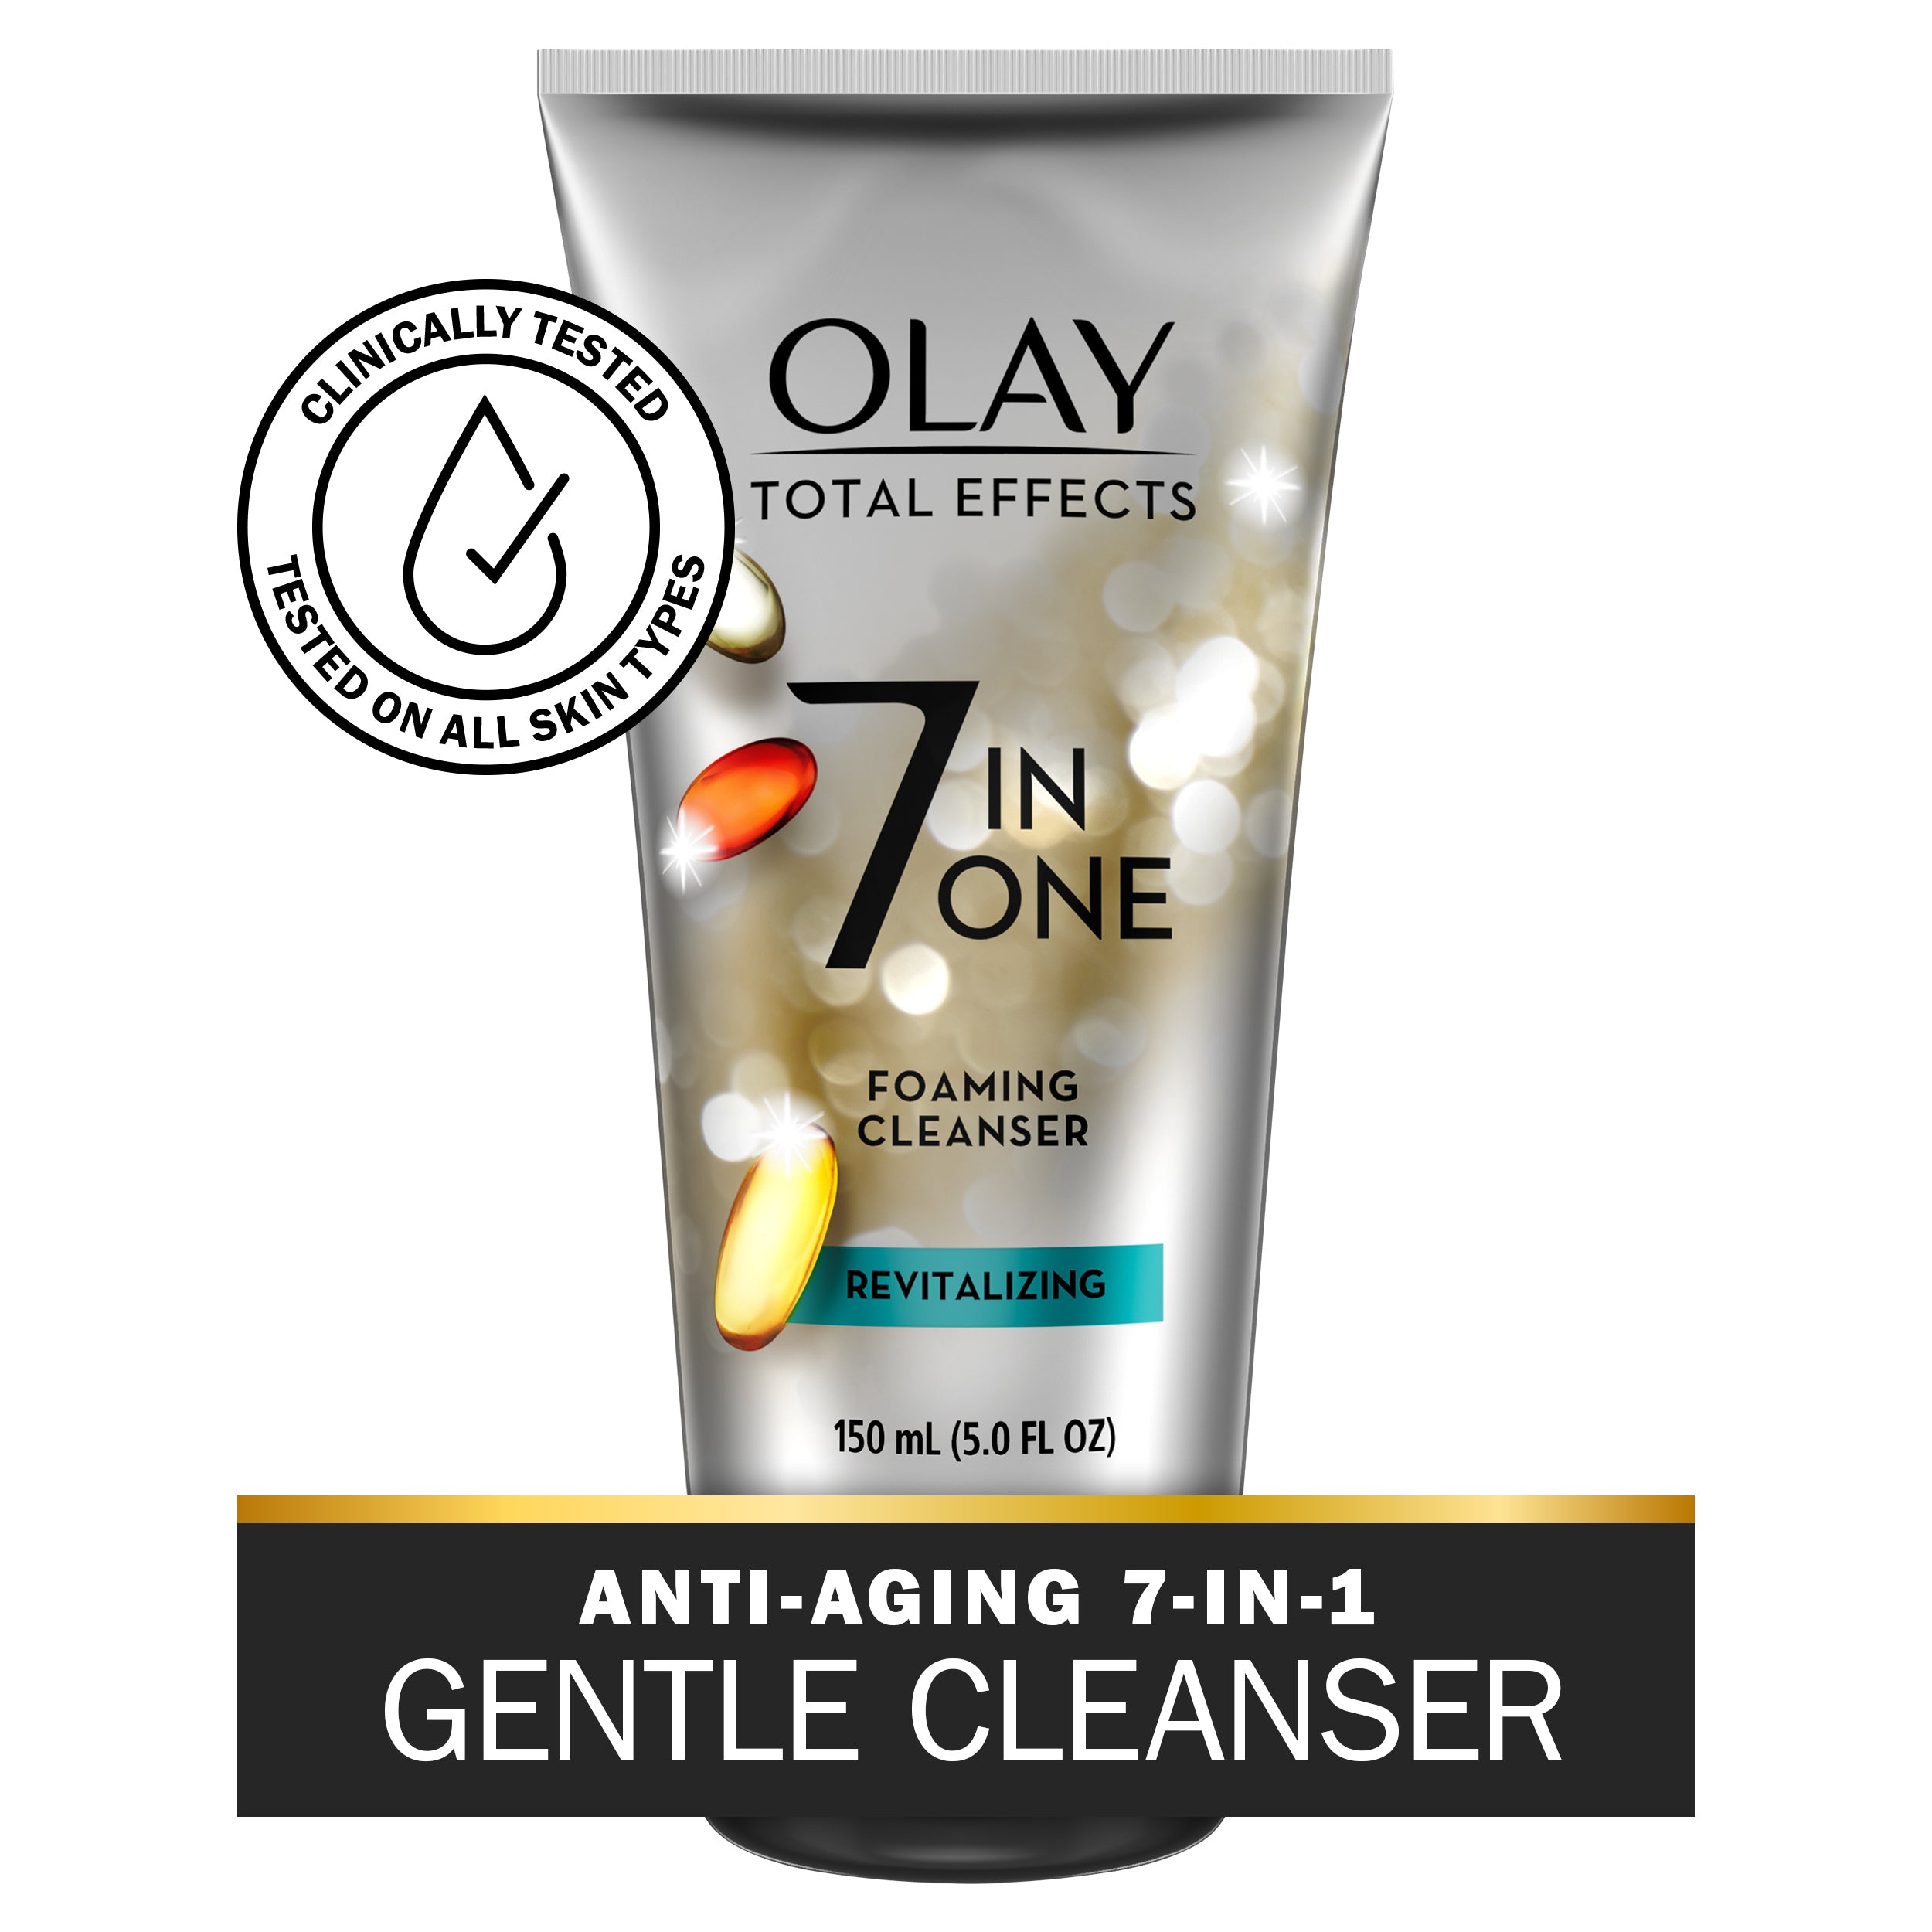 Olay Total Effects Revitalizing Foaming Facial Cleanser, All Skin Types 5.0 fl oz | MTTS323